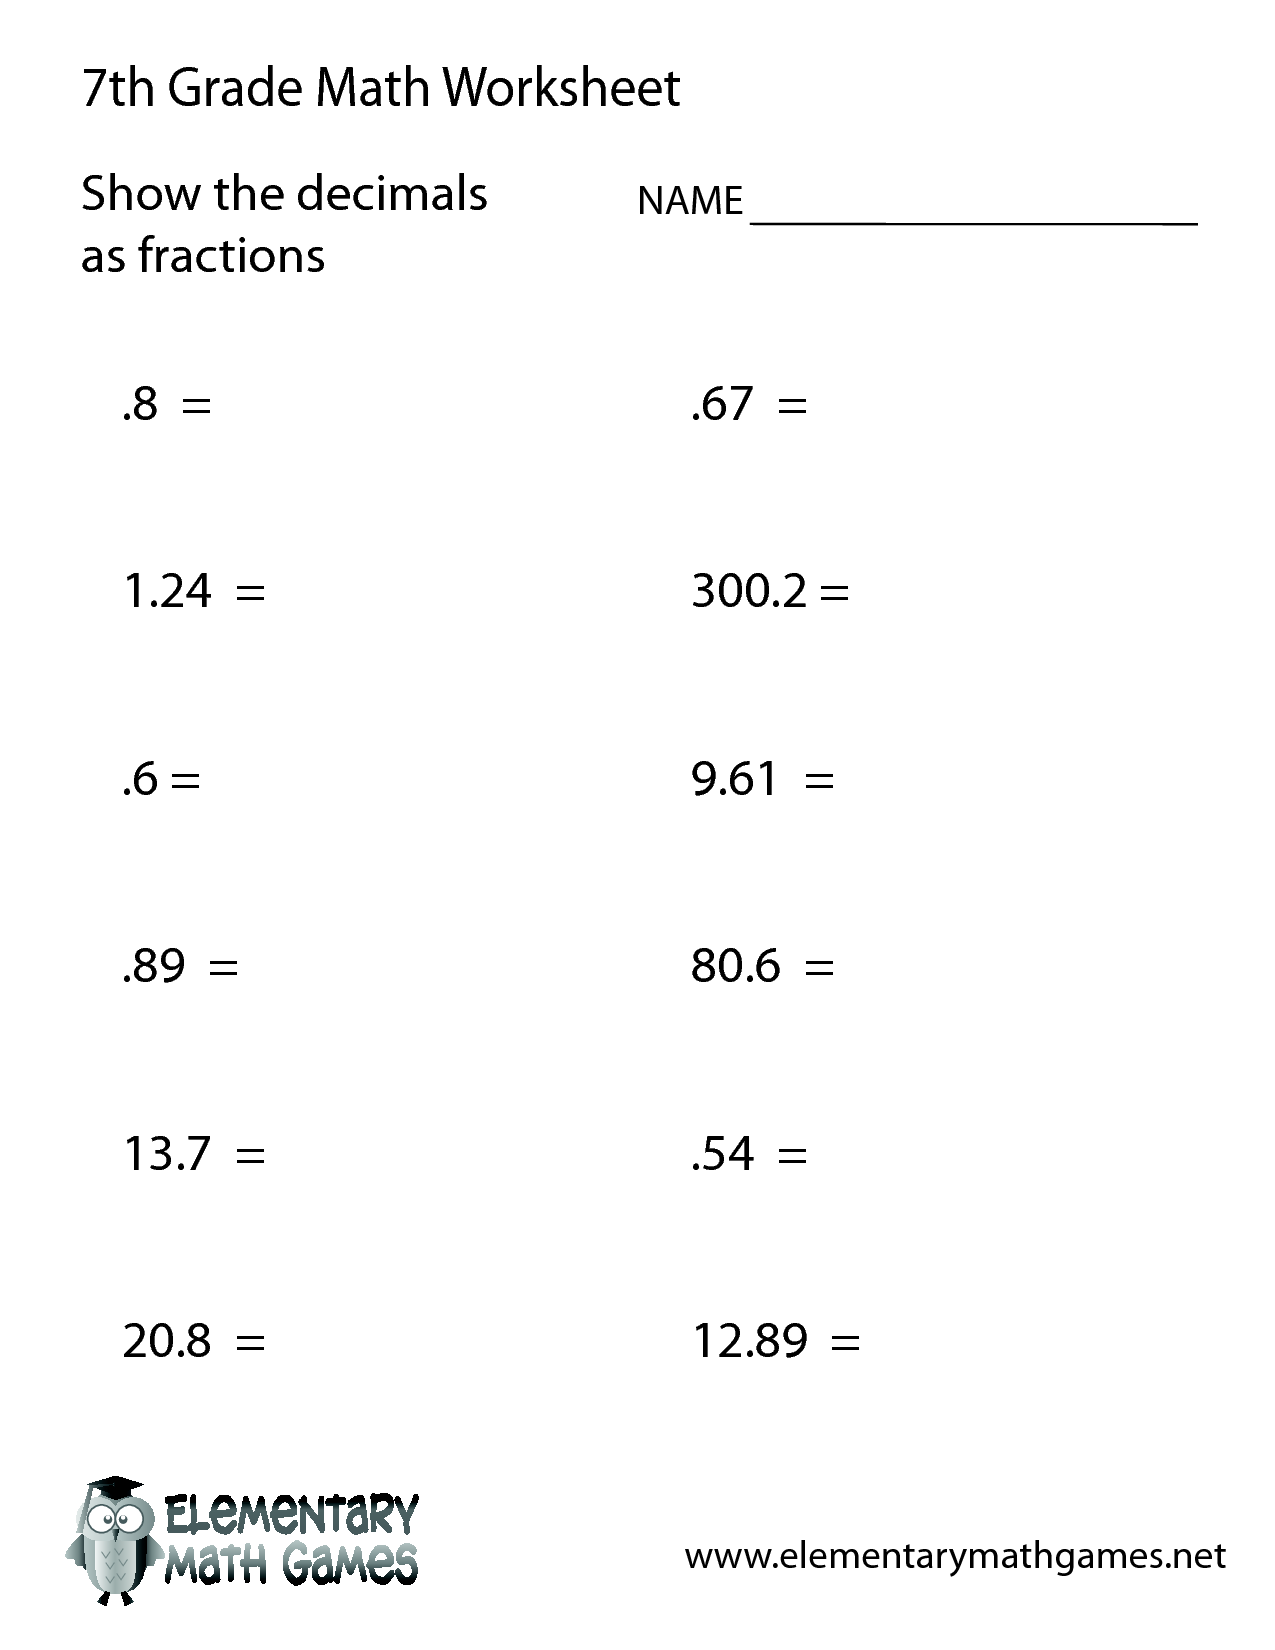 Extra help with decimals and fractions